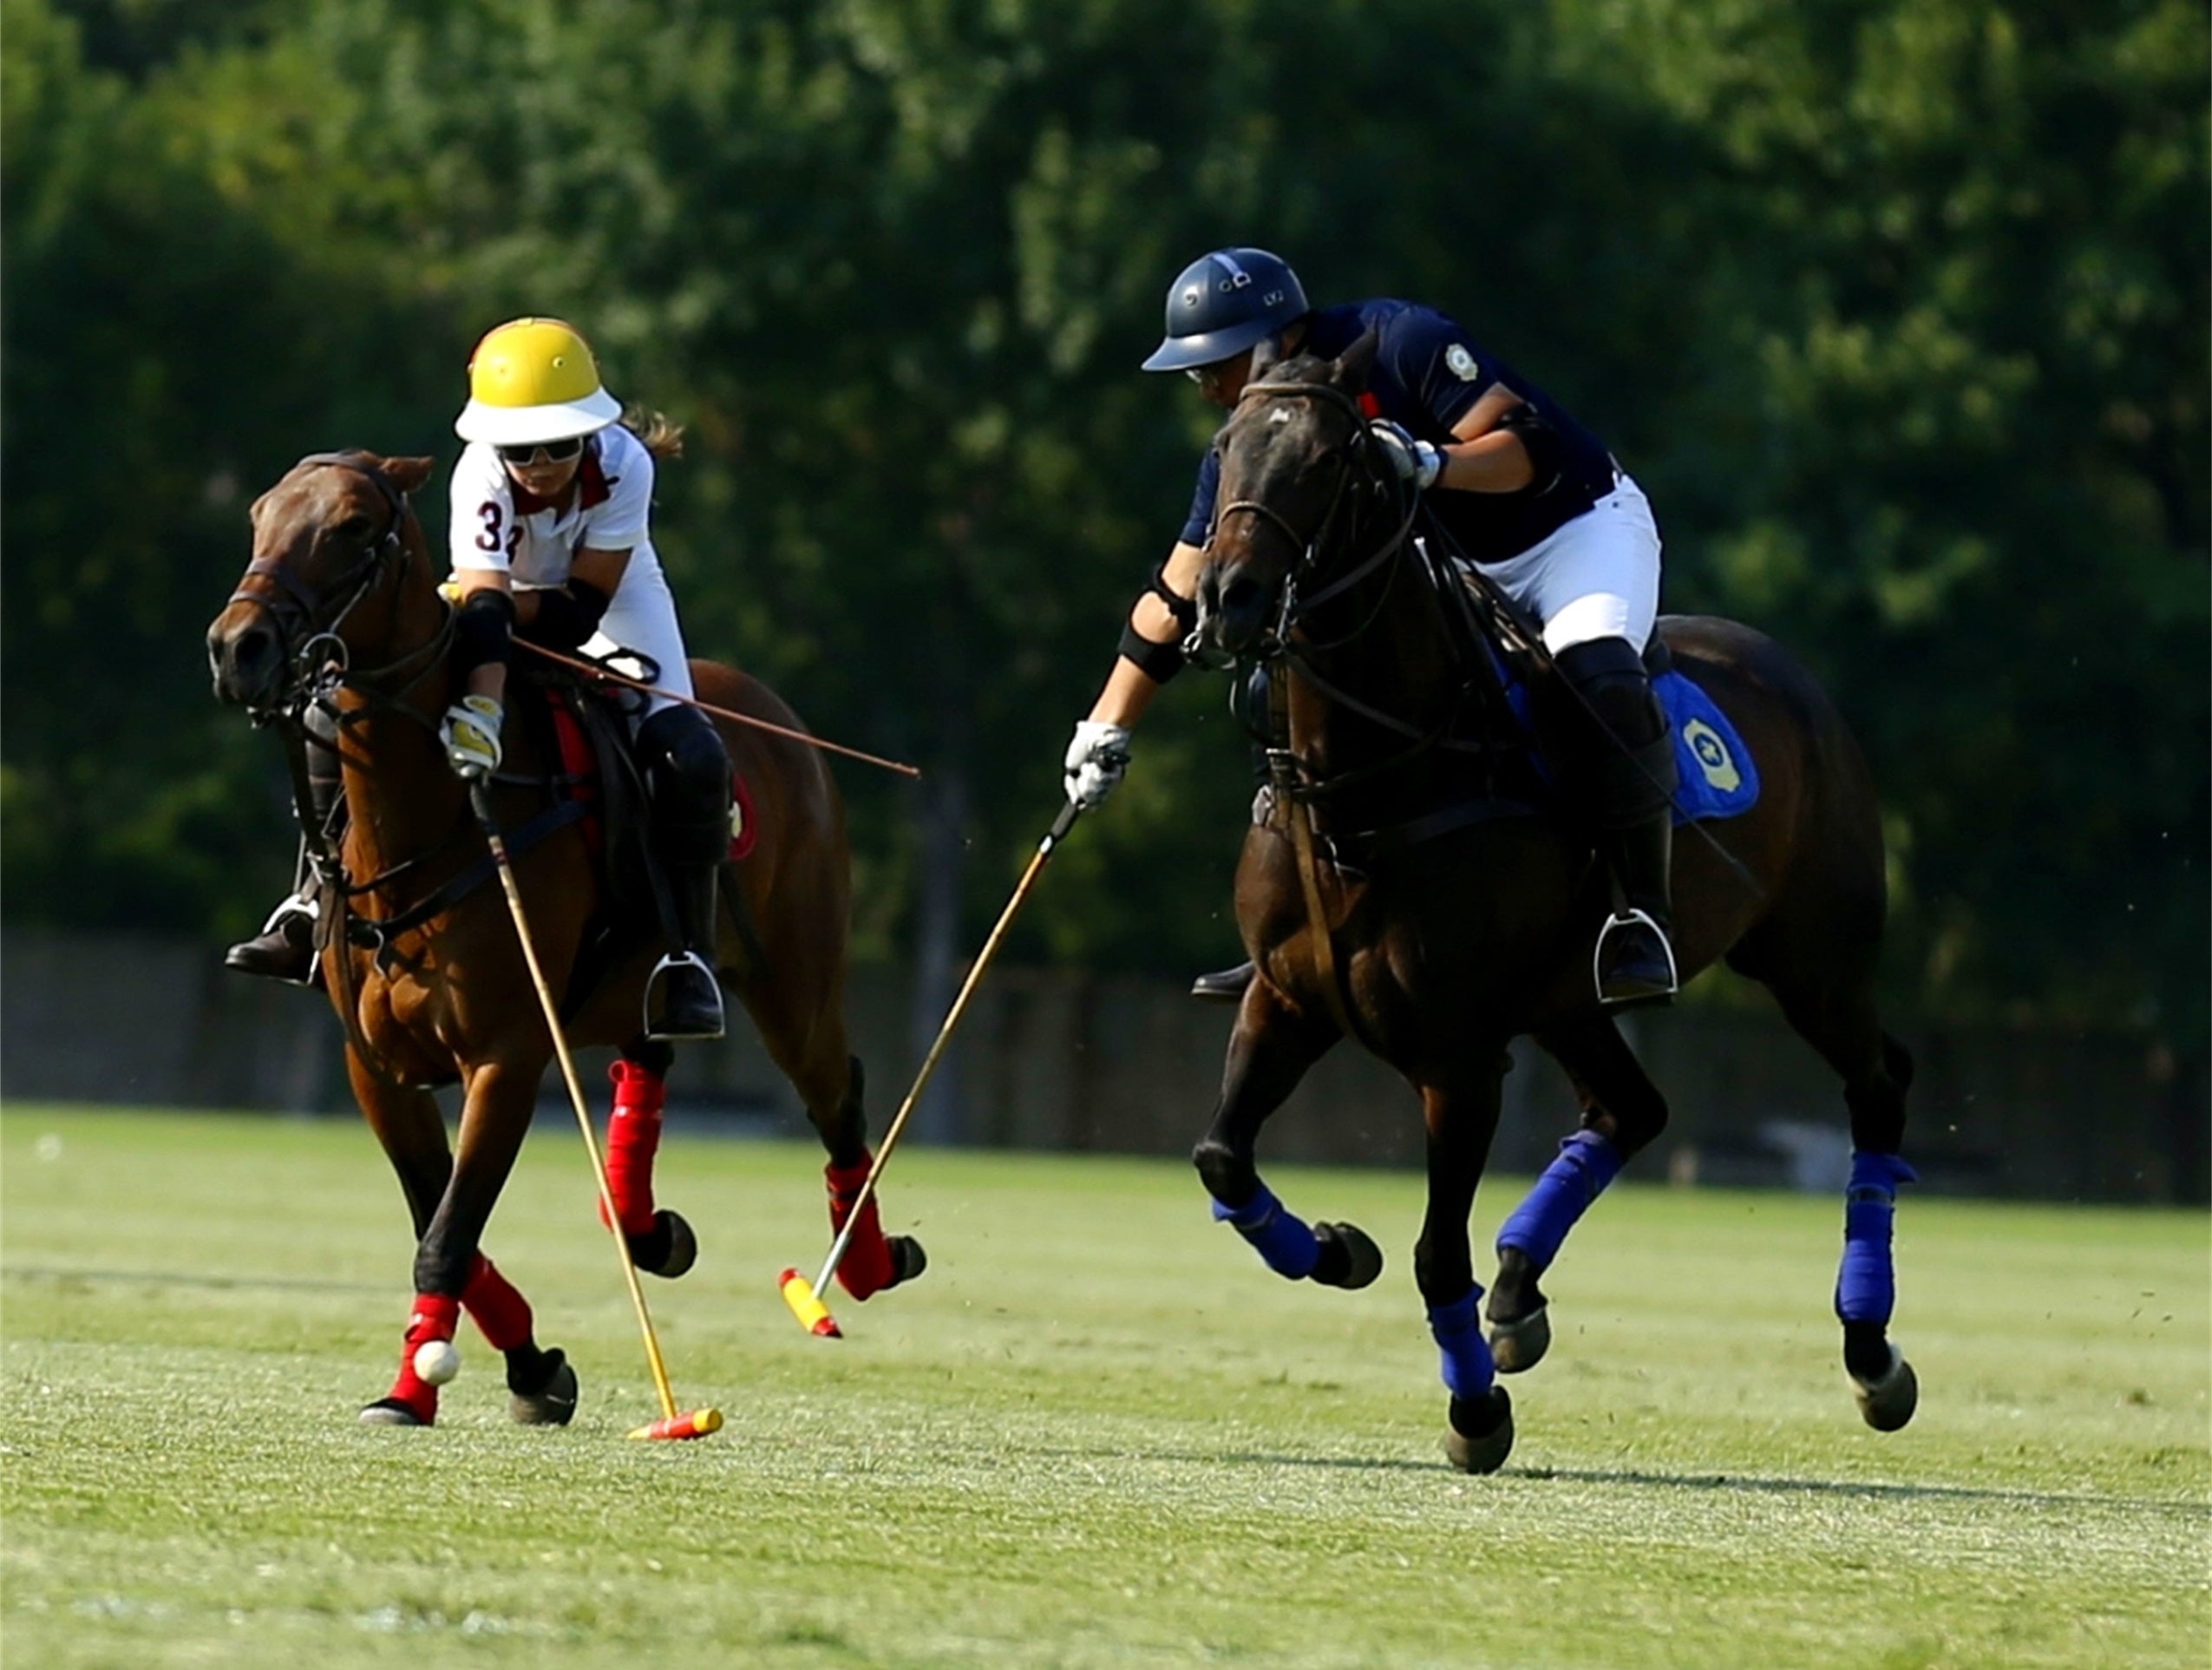 Polo enthusiasts battle for the ball at Tianjin season opening tournament in June, 2023